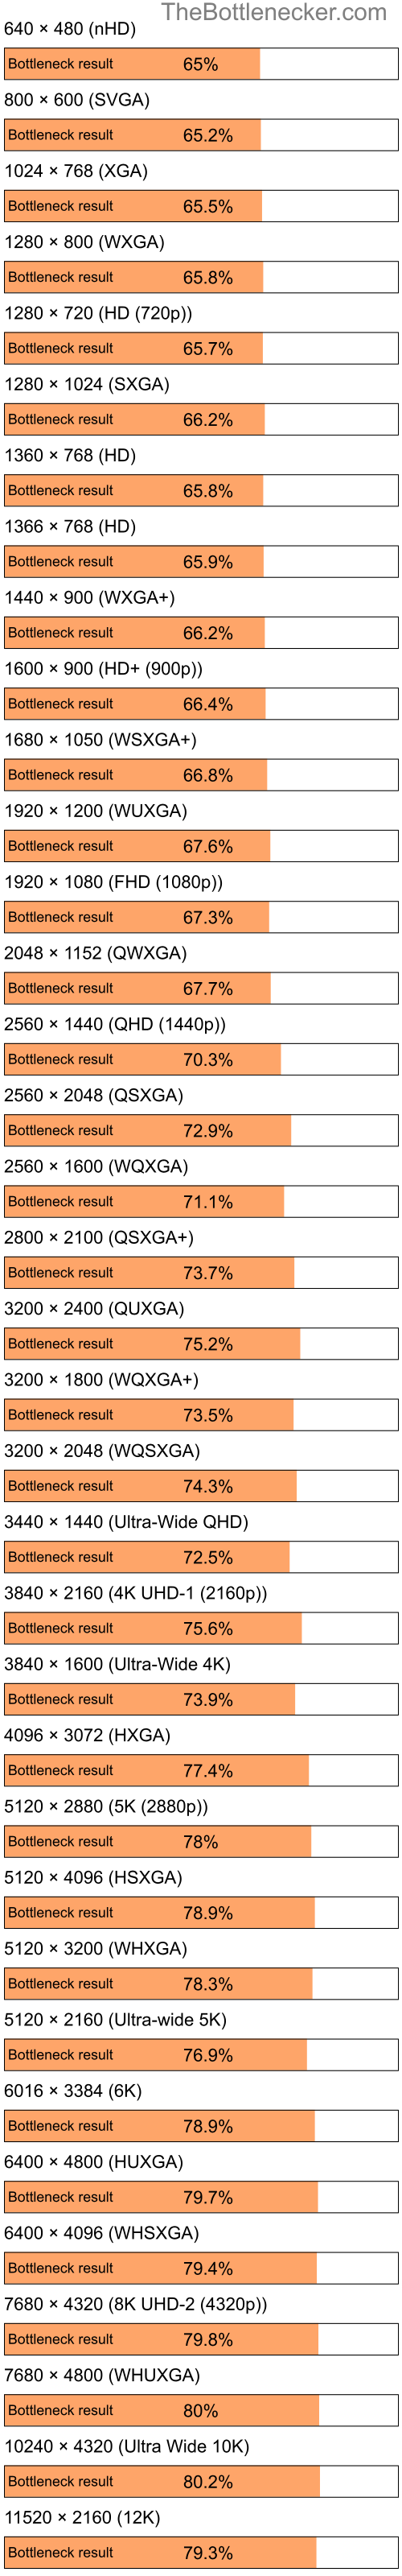 Bottleneck results by resolution for Intel Celeron and NVIDIA Quadro FX 370 in General Tasks